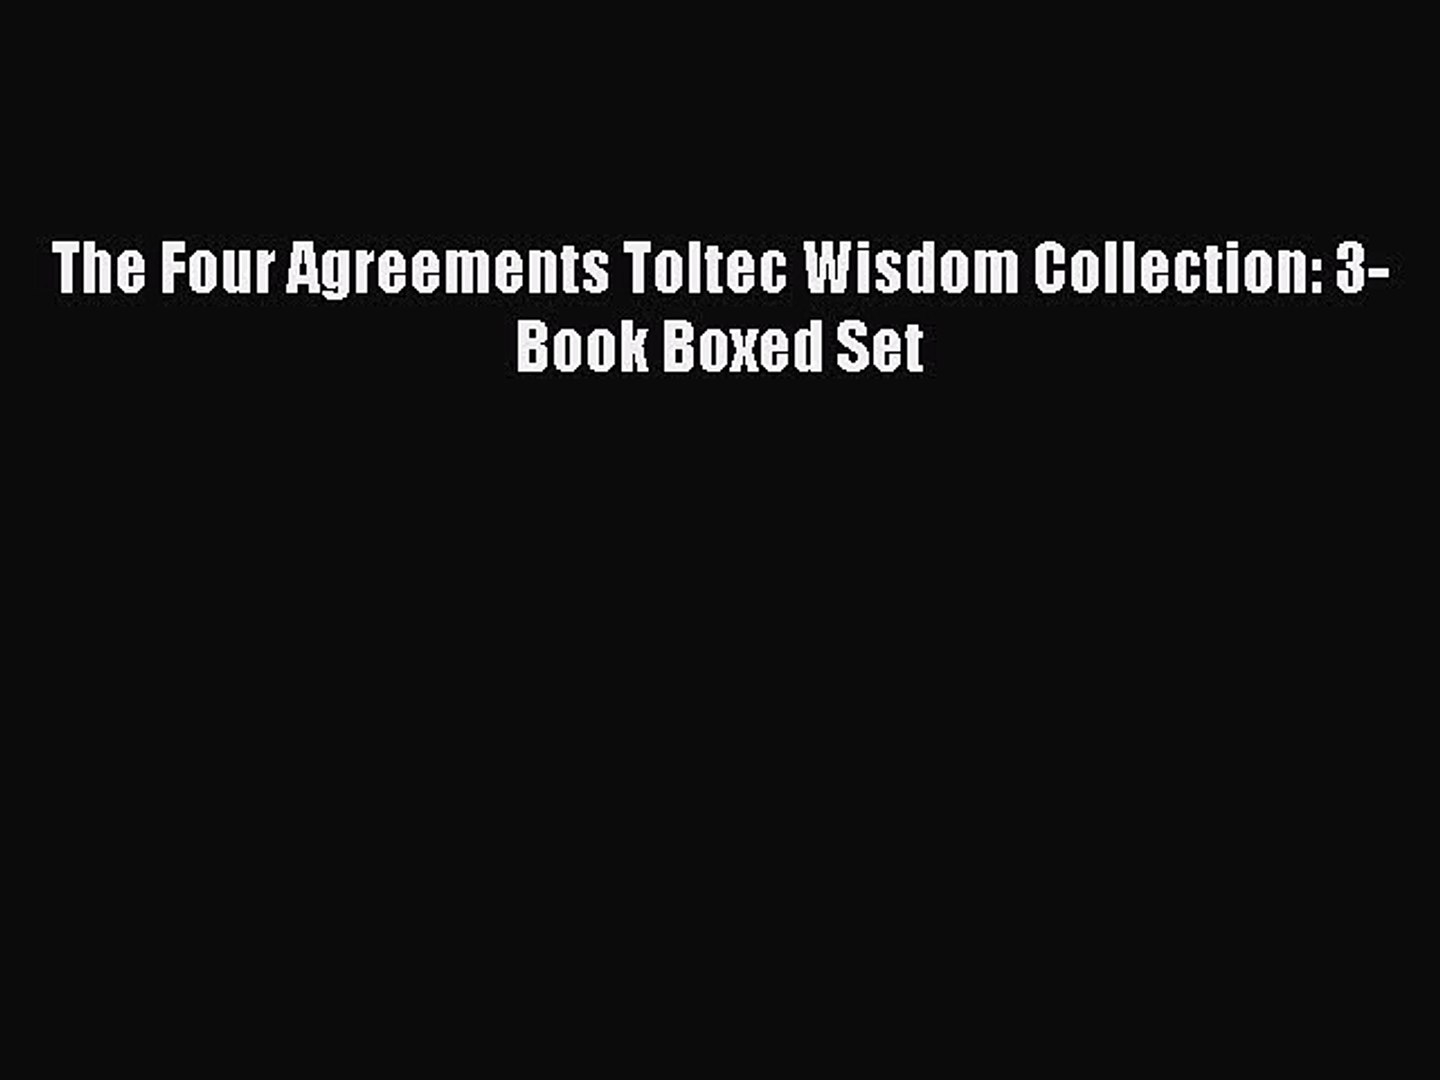 Four Agreements Book Free Download Pdf Download The Four Agreements Toltec Wisdom Collection 3 Book Boxed Set Read Online